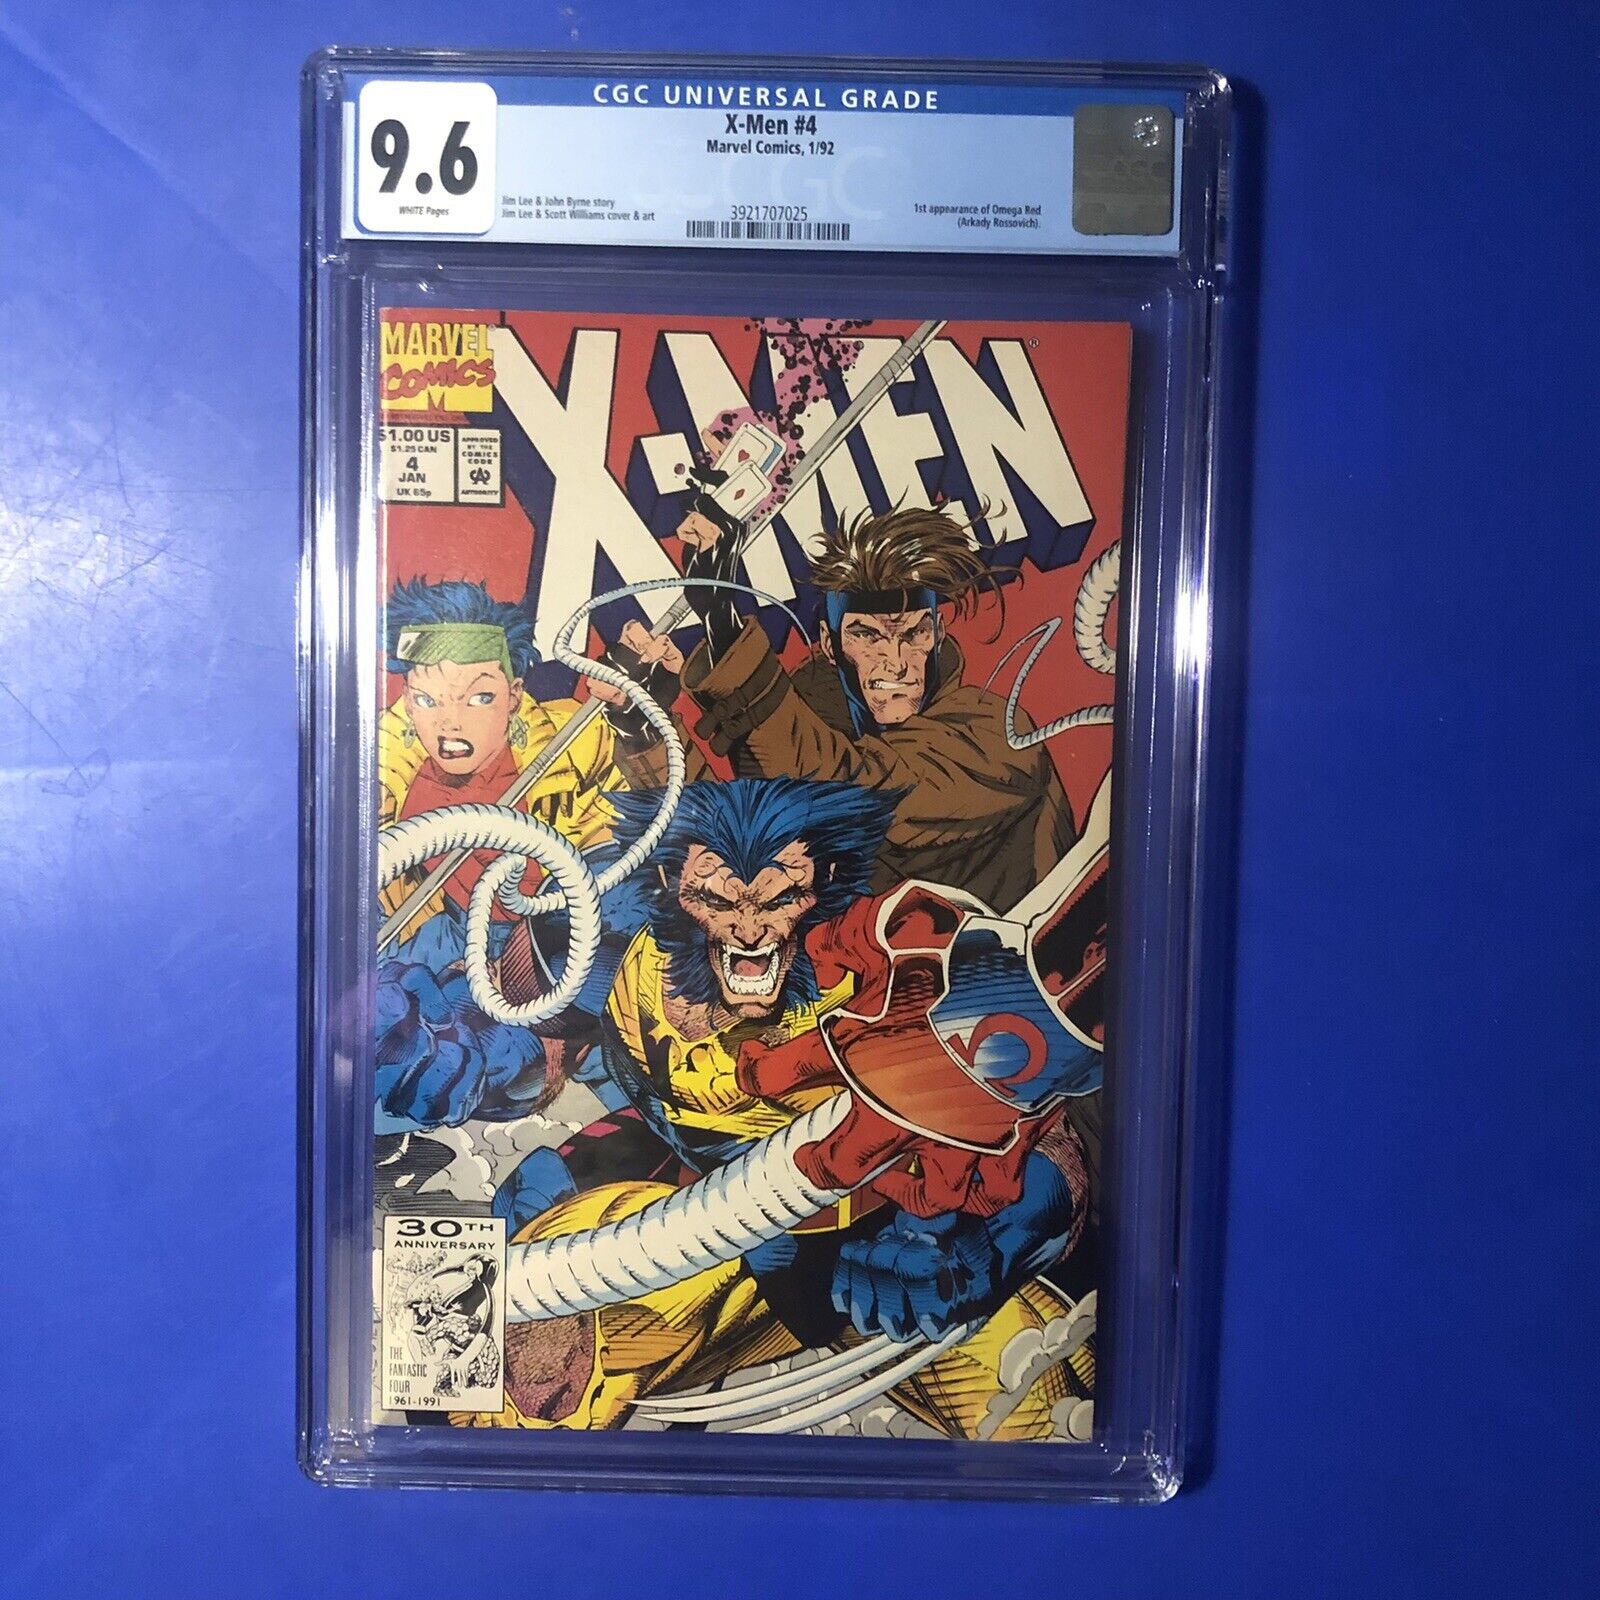 X-MEN #4 CGC 9.6 WHITE PAGES 1st APPEARANCE OMEGA RED JIM LEE Marvel Comics 1992